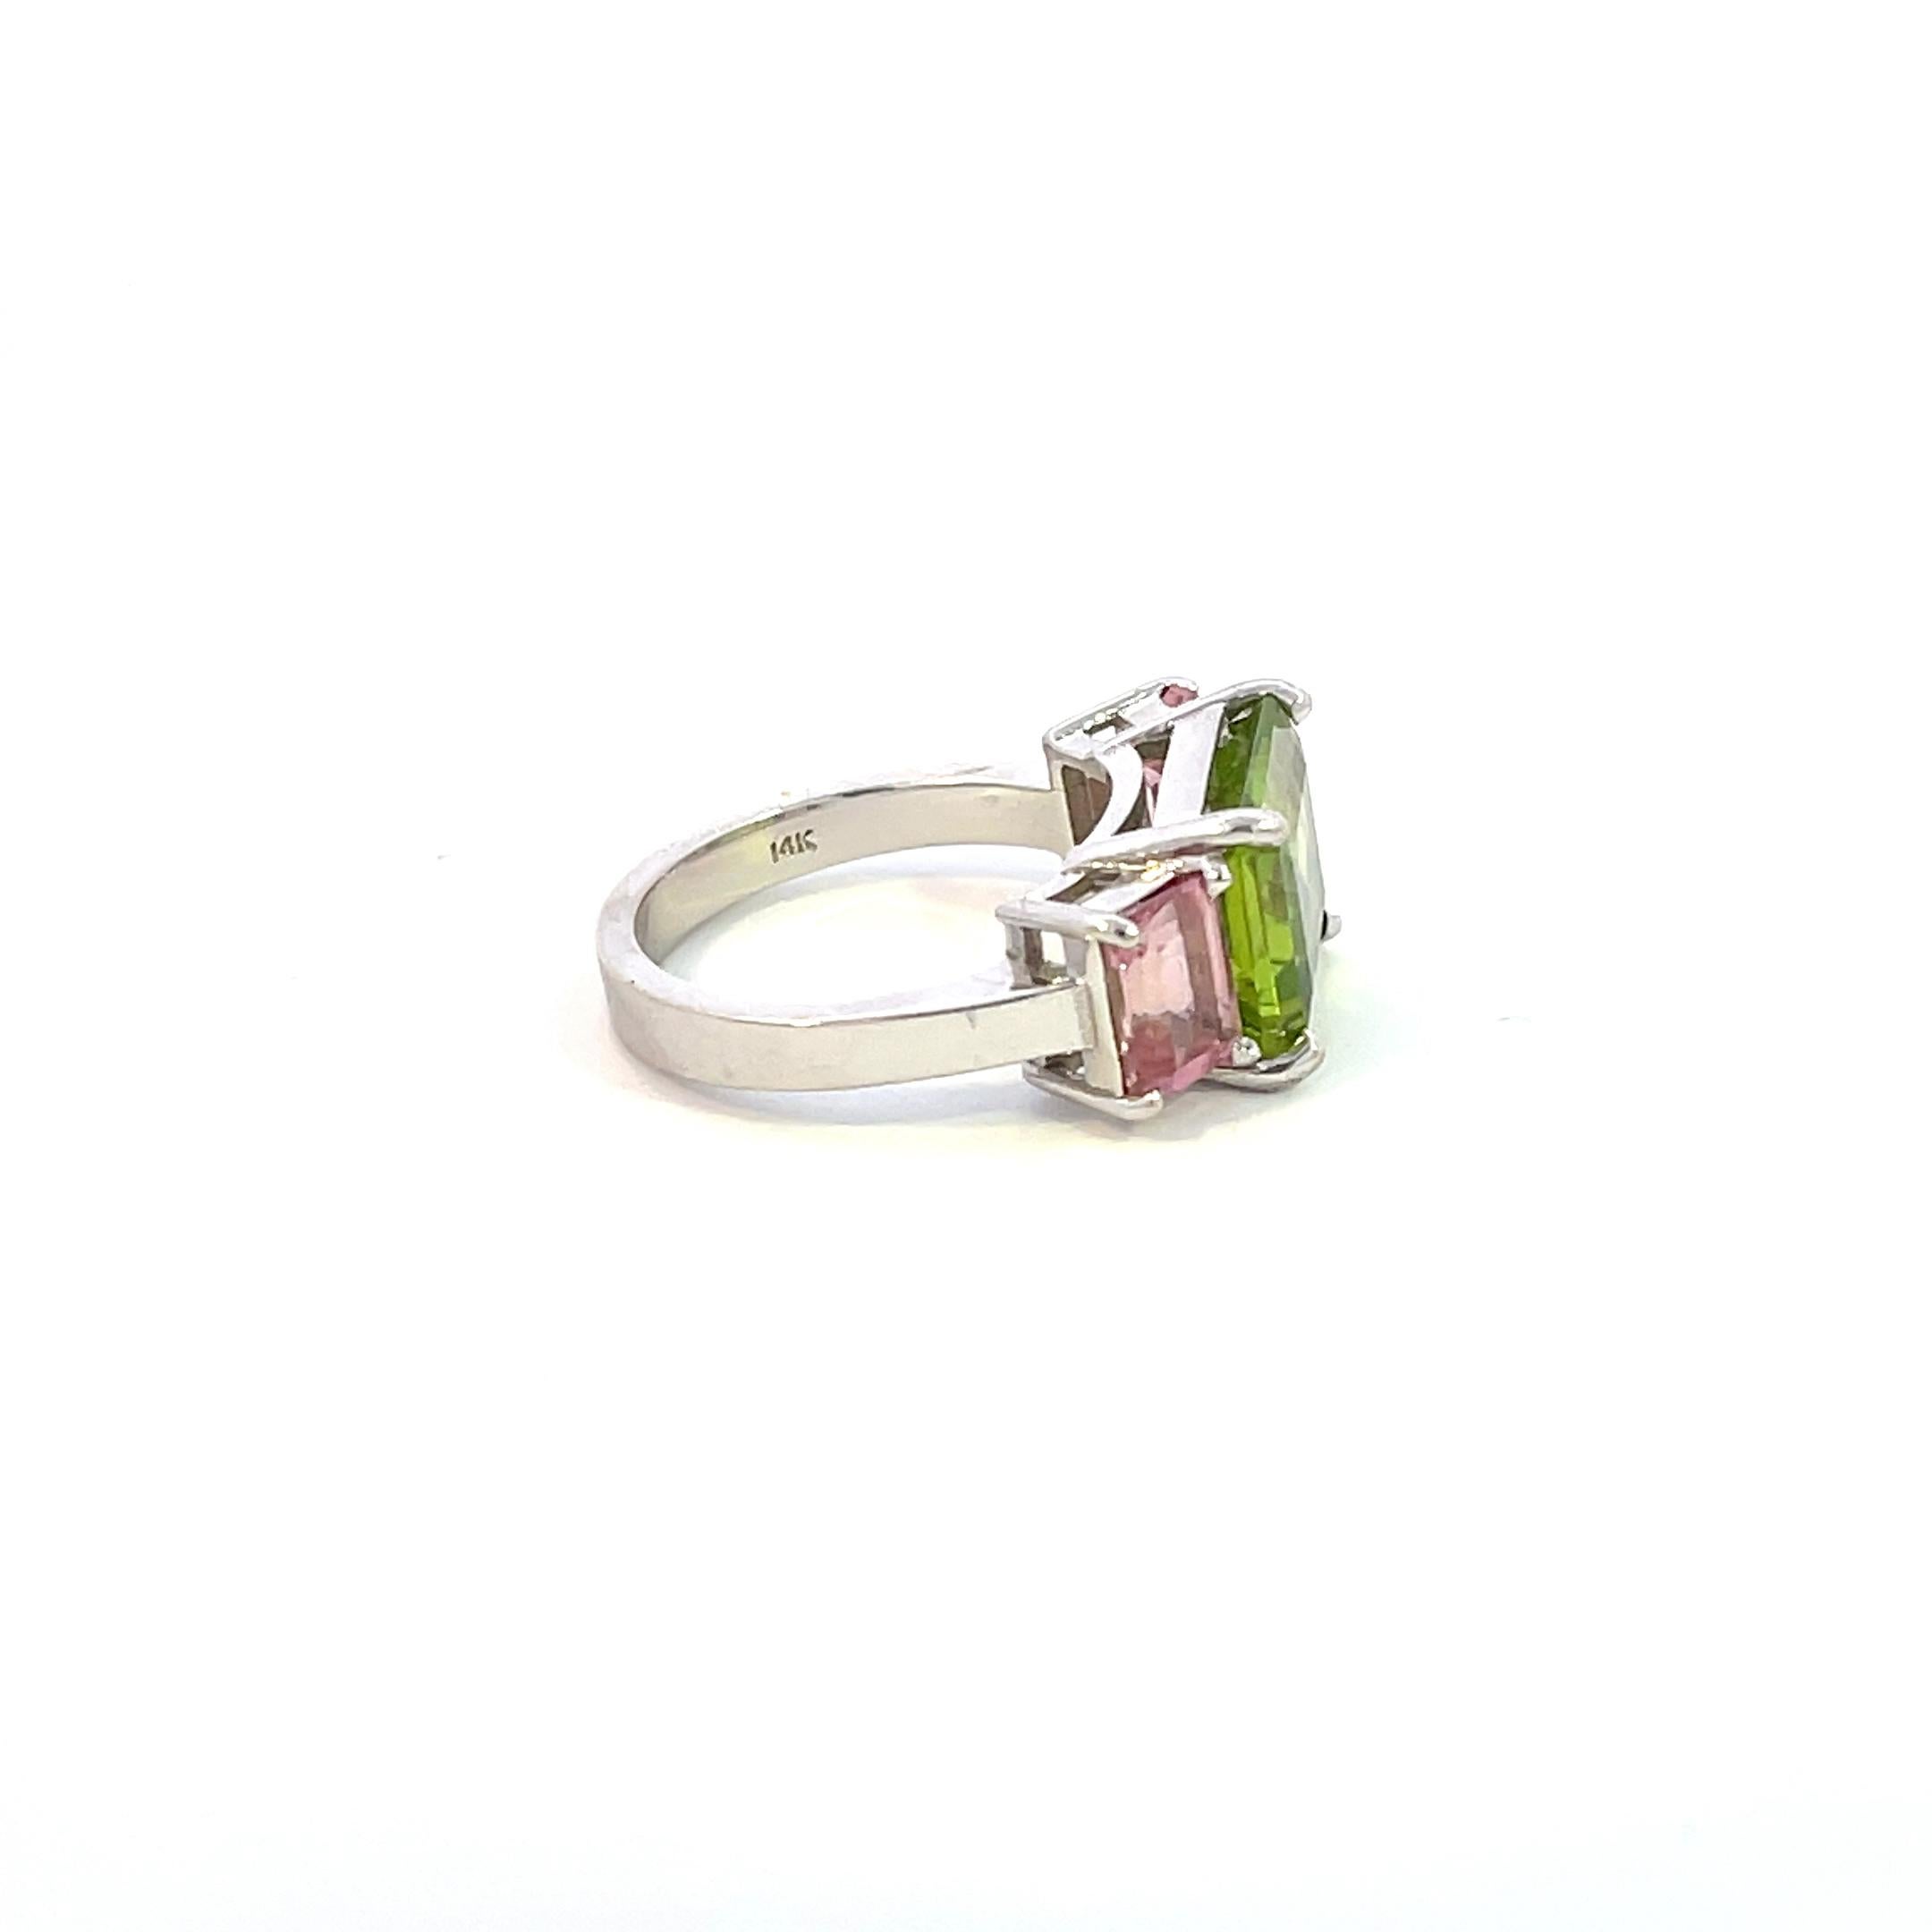 This is a one-of-a-king ring that you won''t want to miss out on! 

The center stone is an Emerald Cut Green Peridot Stone weighing approx 5.25cts (11.20 x 9.20mm) and is paired with Two (2) Emerald Cut Pink Sapphires weighing approx 1ct each stone